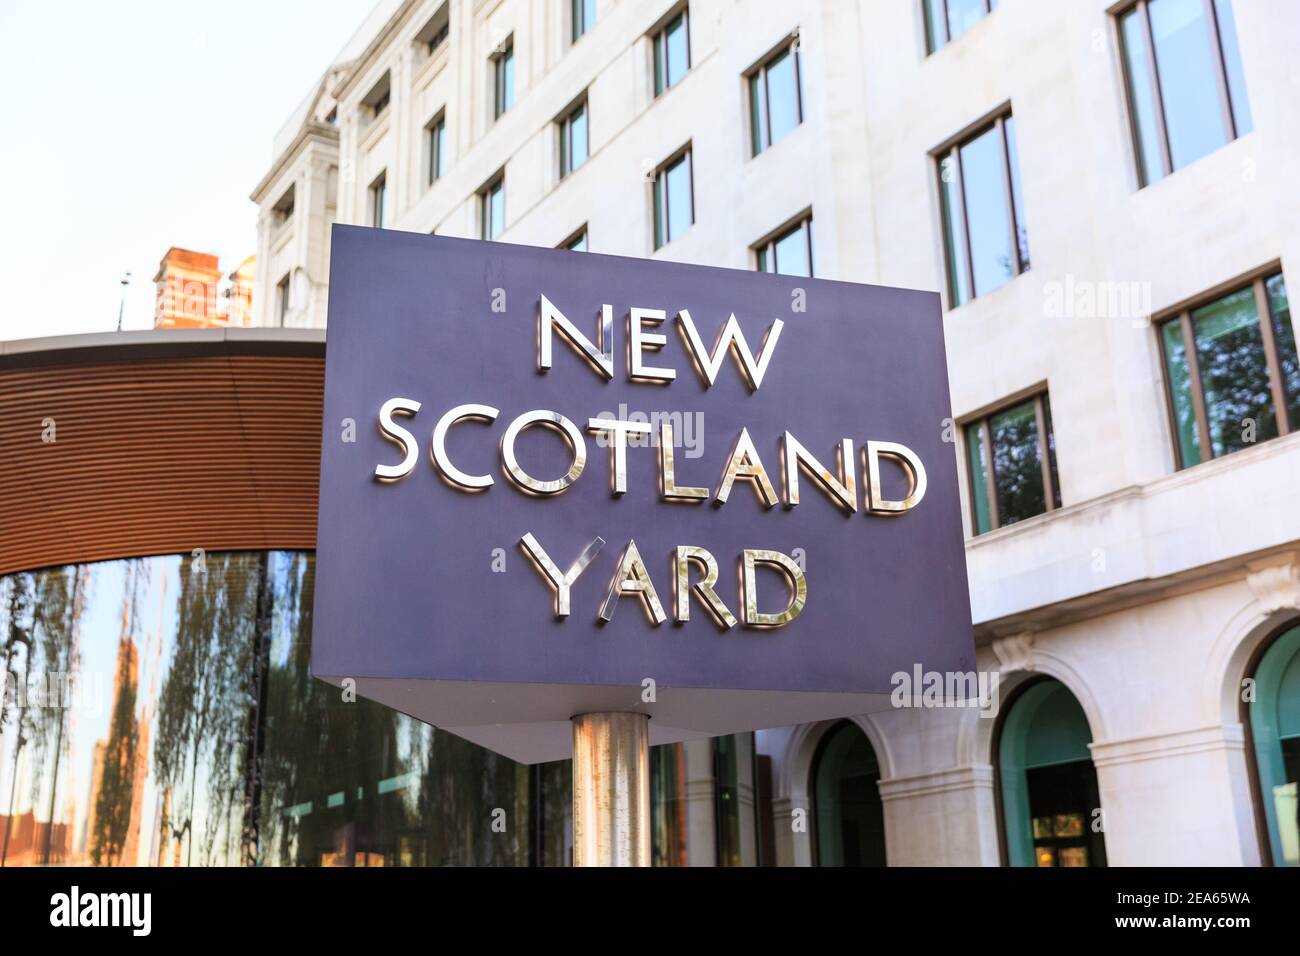 New Scotland Yard sign, building exterior Scotland Yard Headquarters of the Metropolitan Police force in Victoria Embankment, Westminster London, UK Stock Photo